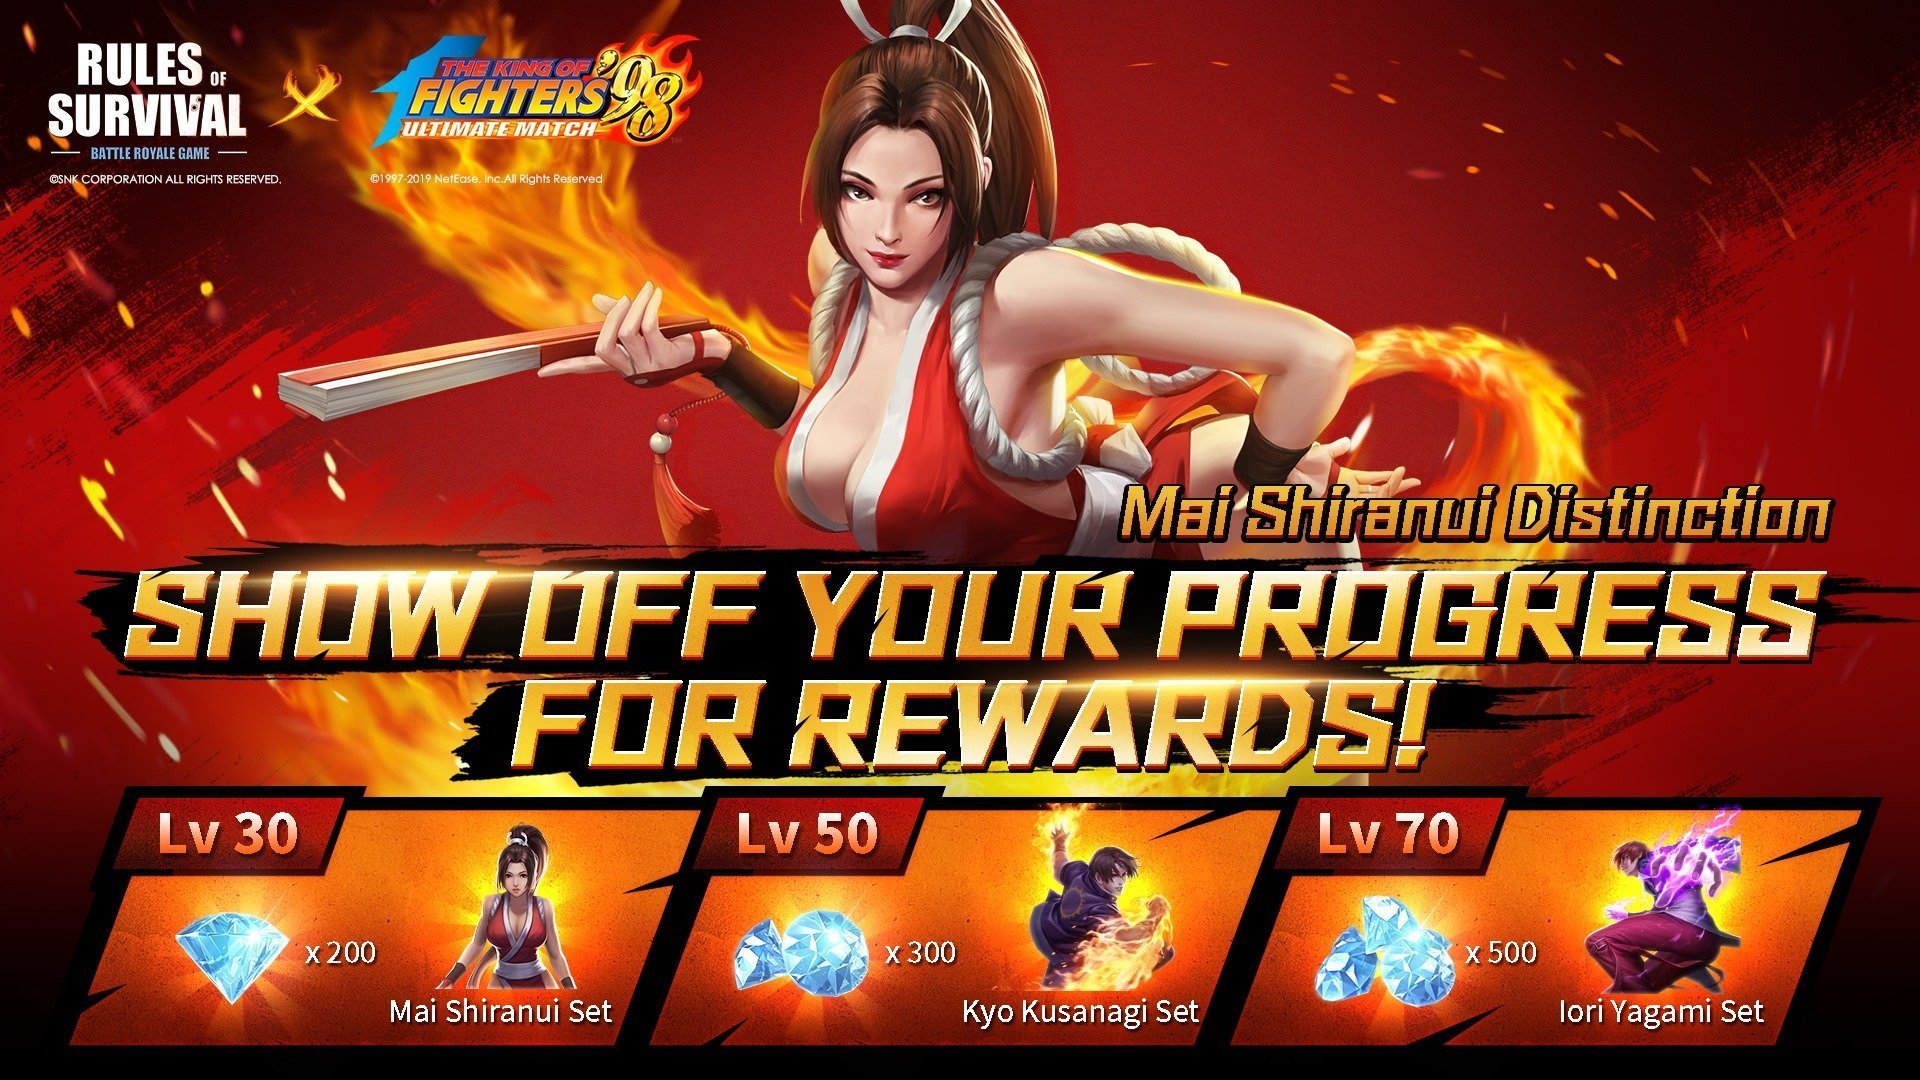 Rules of Survivor X The King of Fighters event image